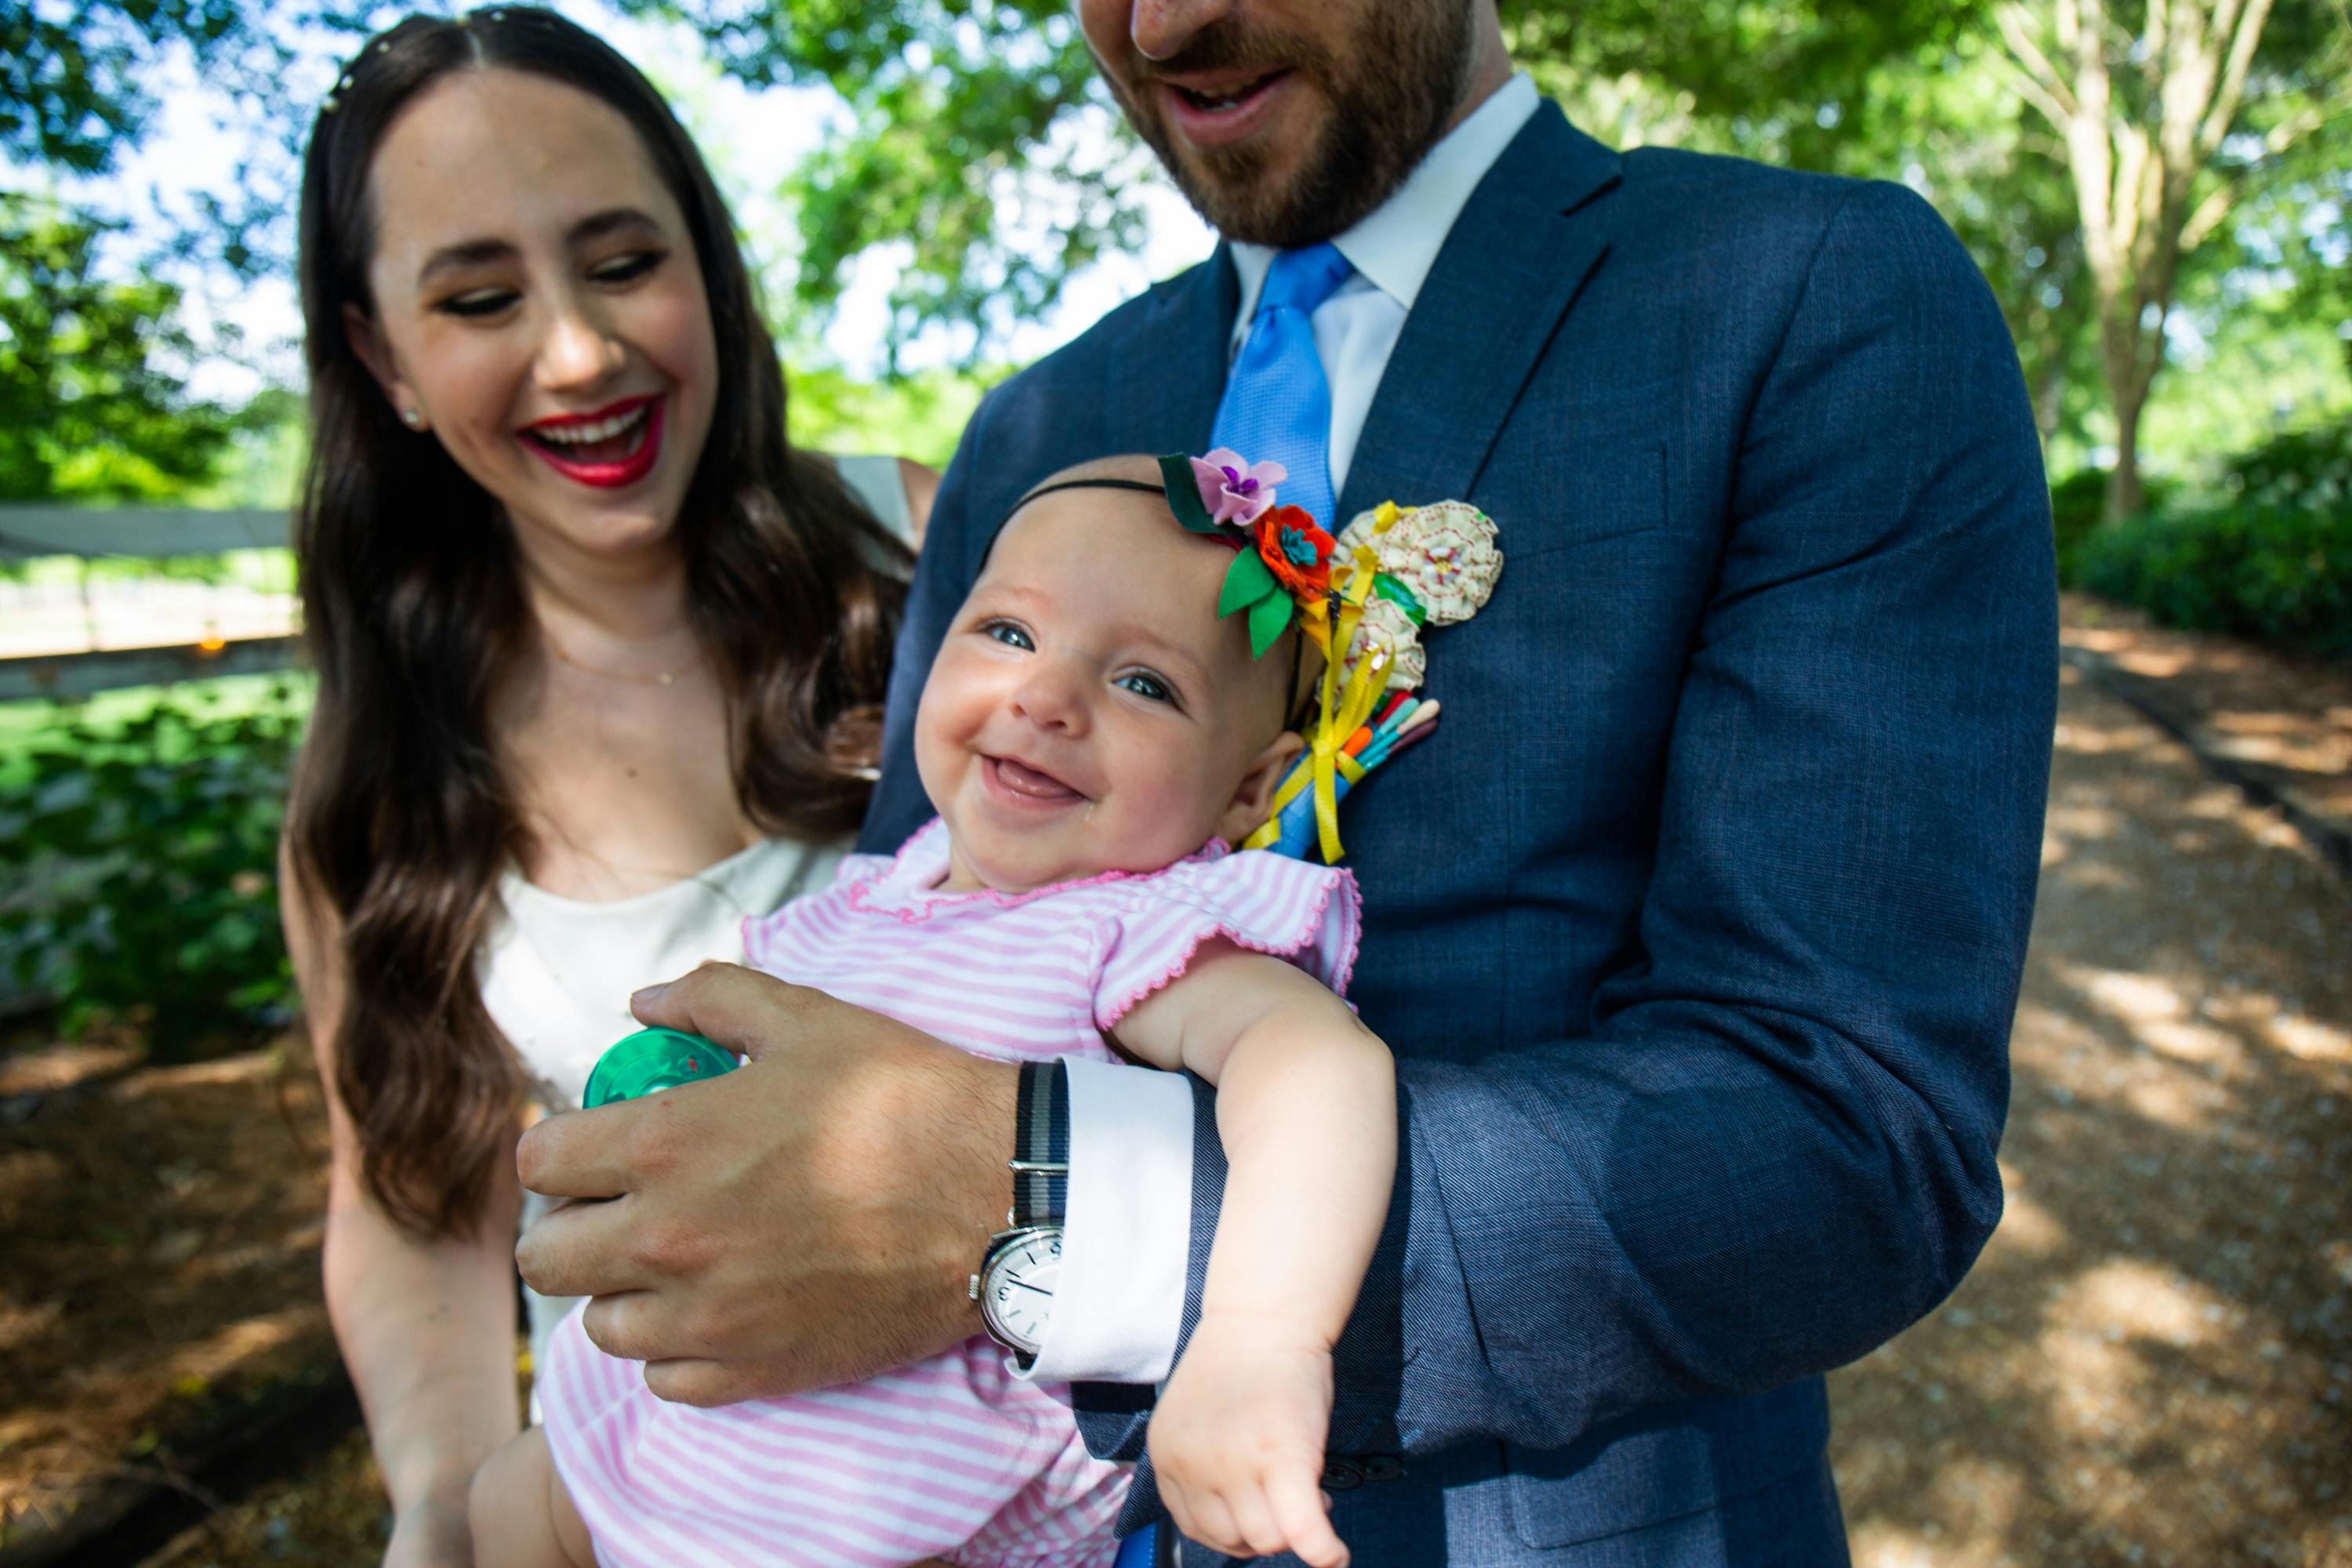 Bride Lauren in white dress, groom Jake in blue suit, and 3 month old daughter Rhea in striped pink and white onesie on the wedding day. All three are smiling, and Rhea has on a headband with three more fabric flowers.